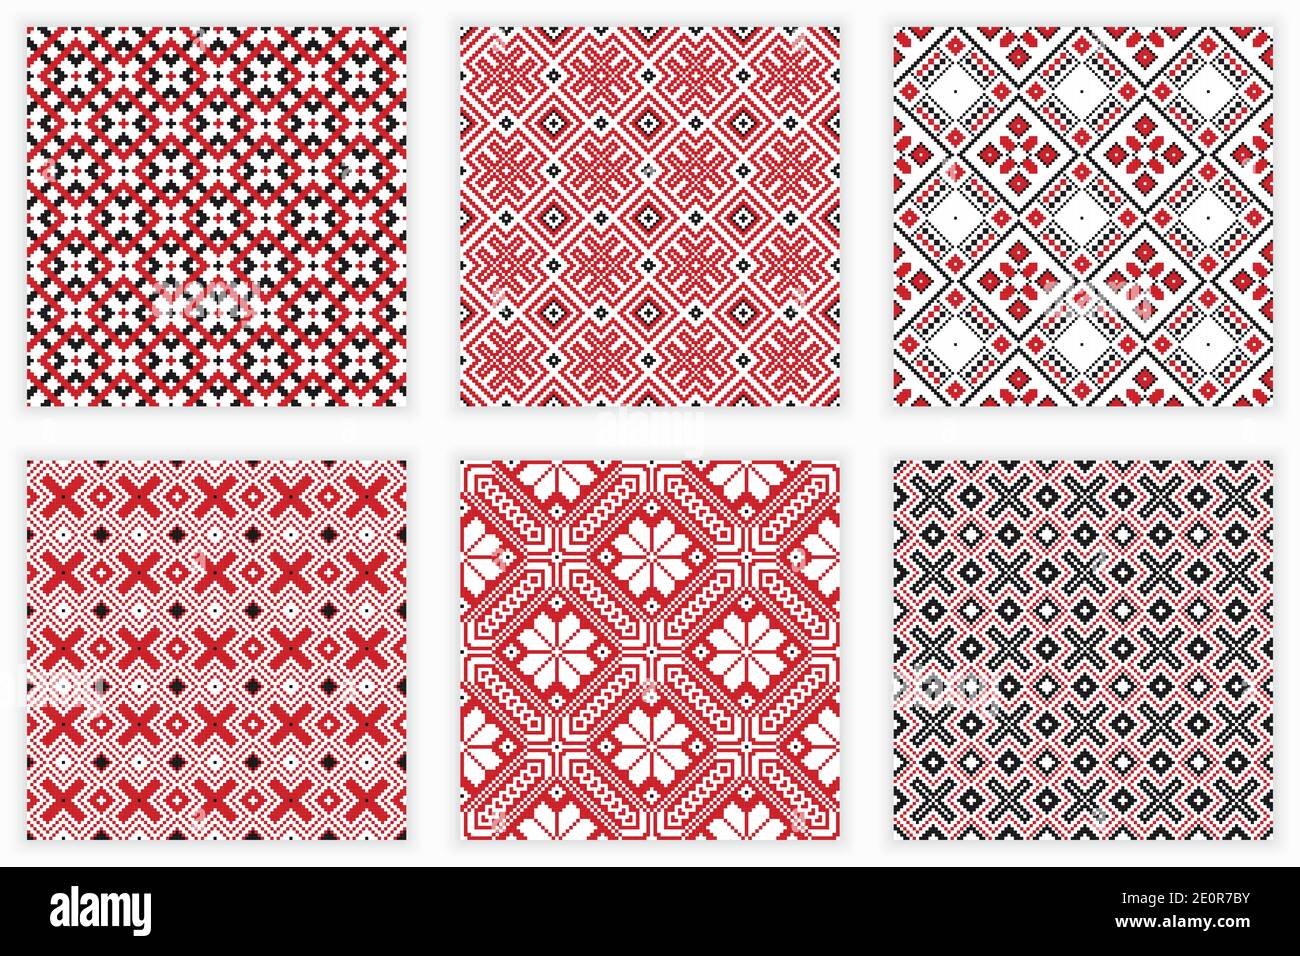 Slavic geometric ornament. Vector illustration of traditional folk embroidery seamless patterns set for your design Stock Vector